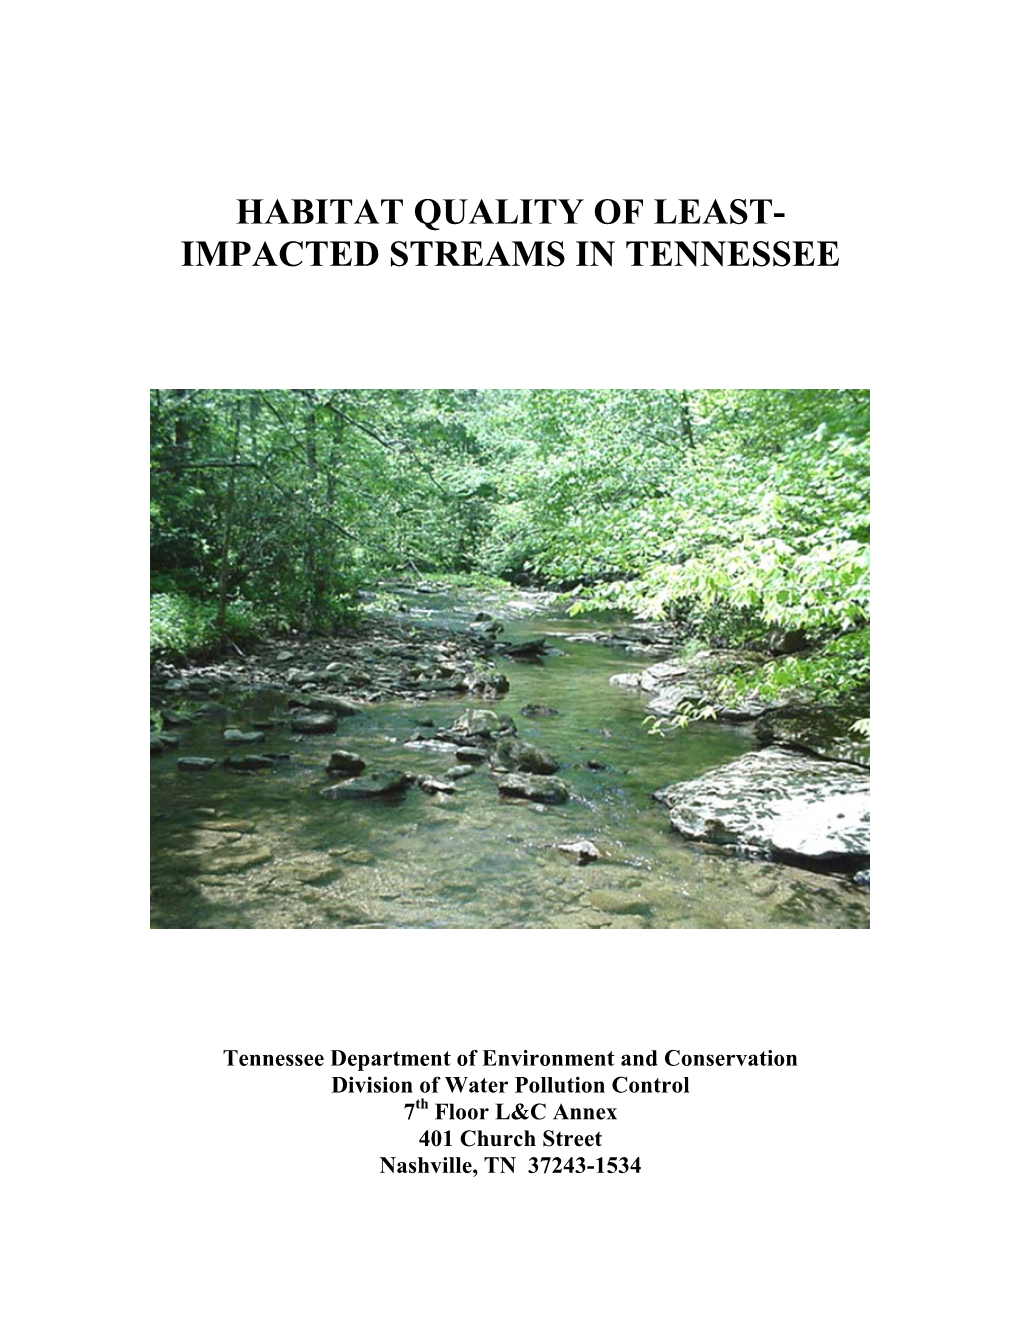 Habitat Quality of Least- Impacted Streams in Tennessee